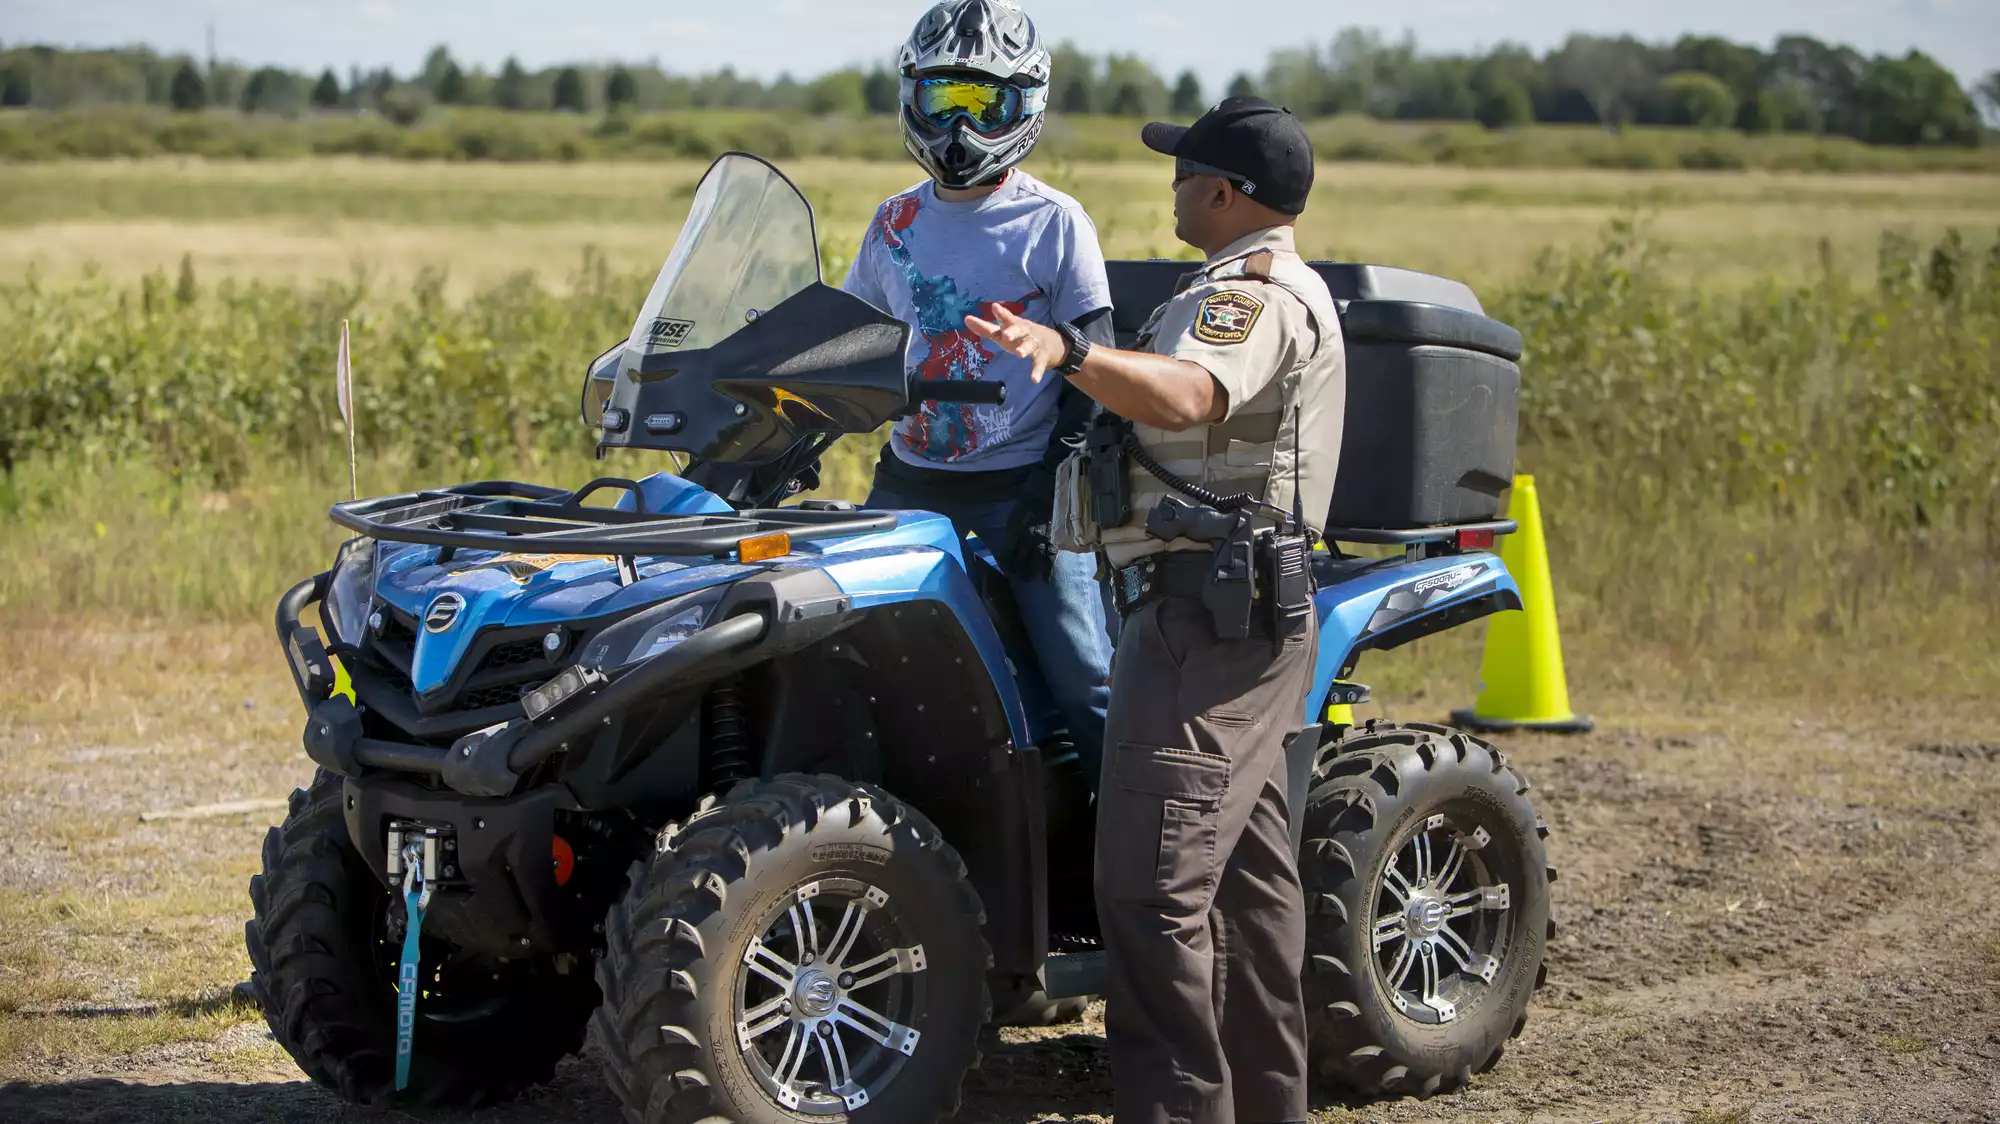 Deadly ATV crashes on pace to surpass last year's total